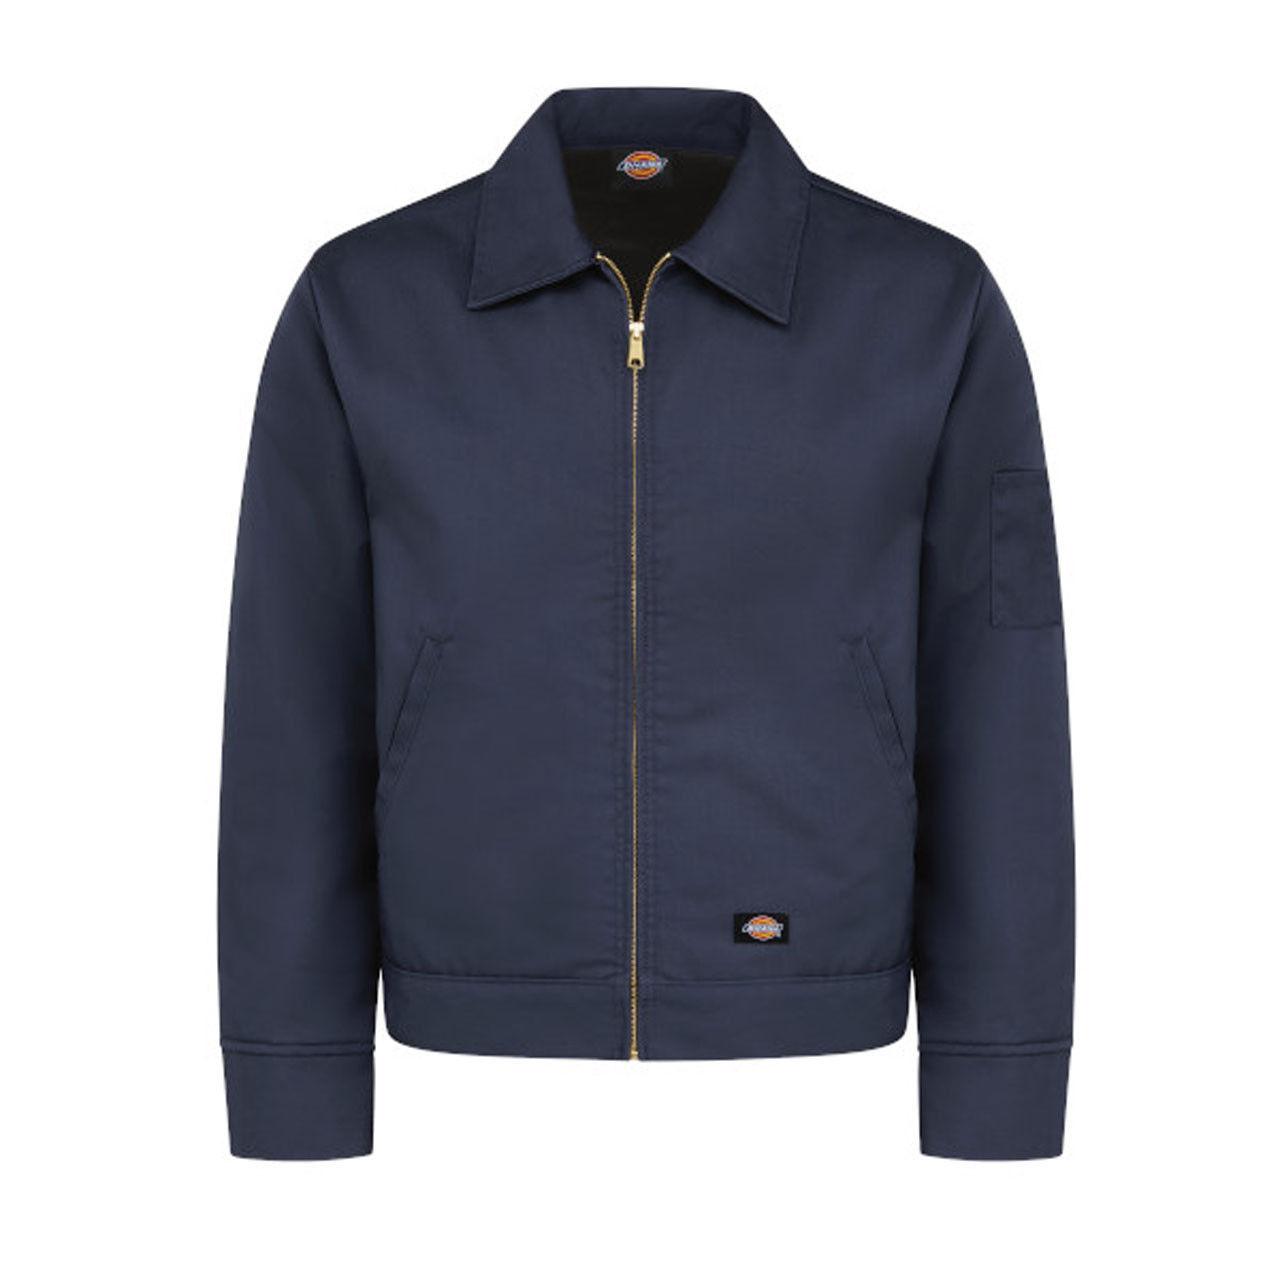 What's the lining material of a dickies jacket mens?